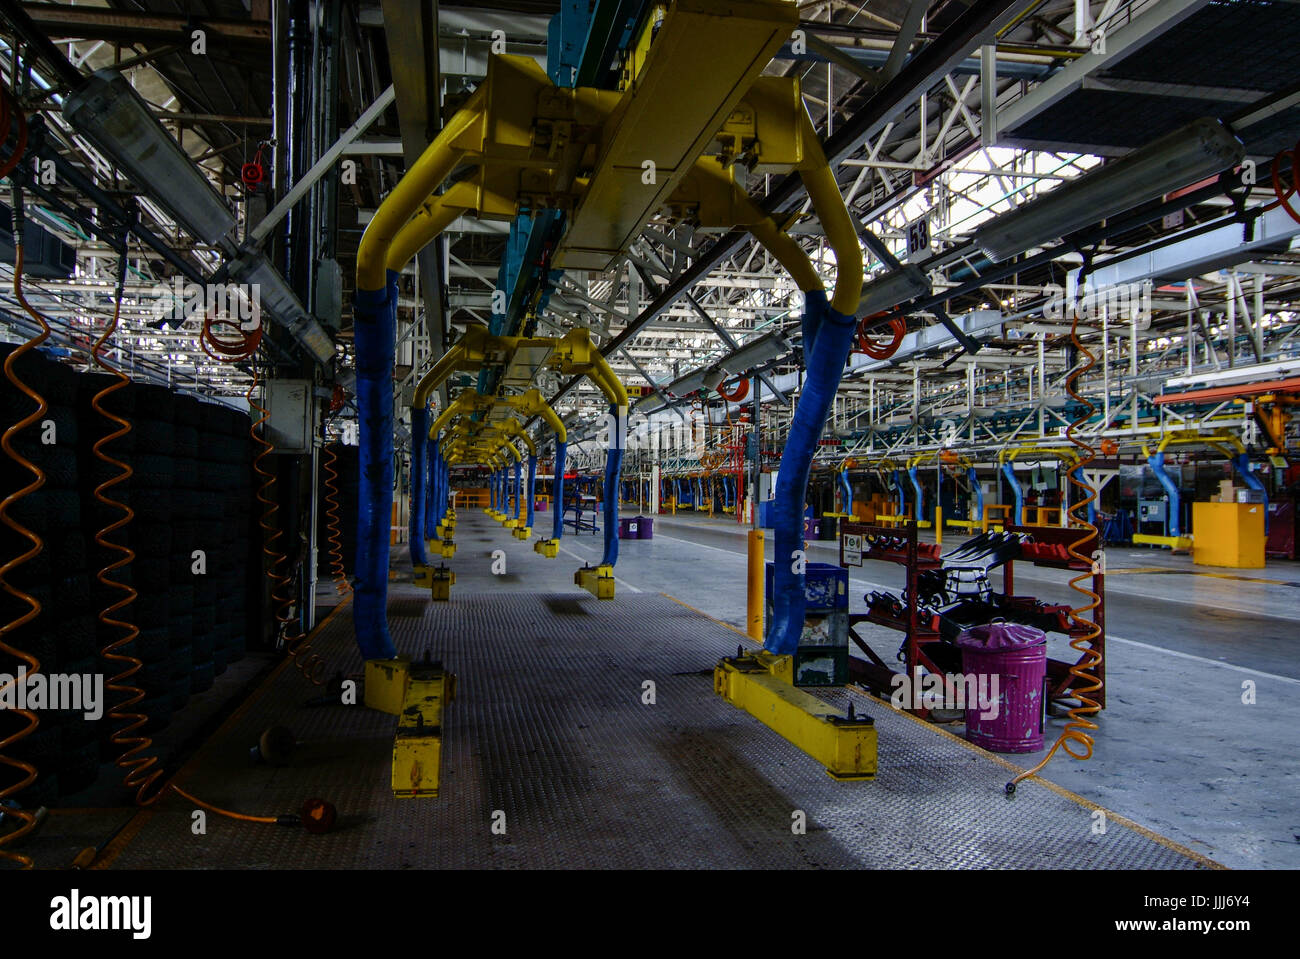 The abandoned production line in the derelict MG Rover car factory in Longbridge, Birmingham, UK in 2007. Stock Photo